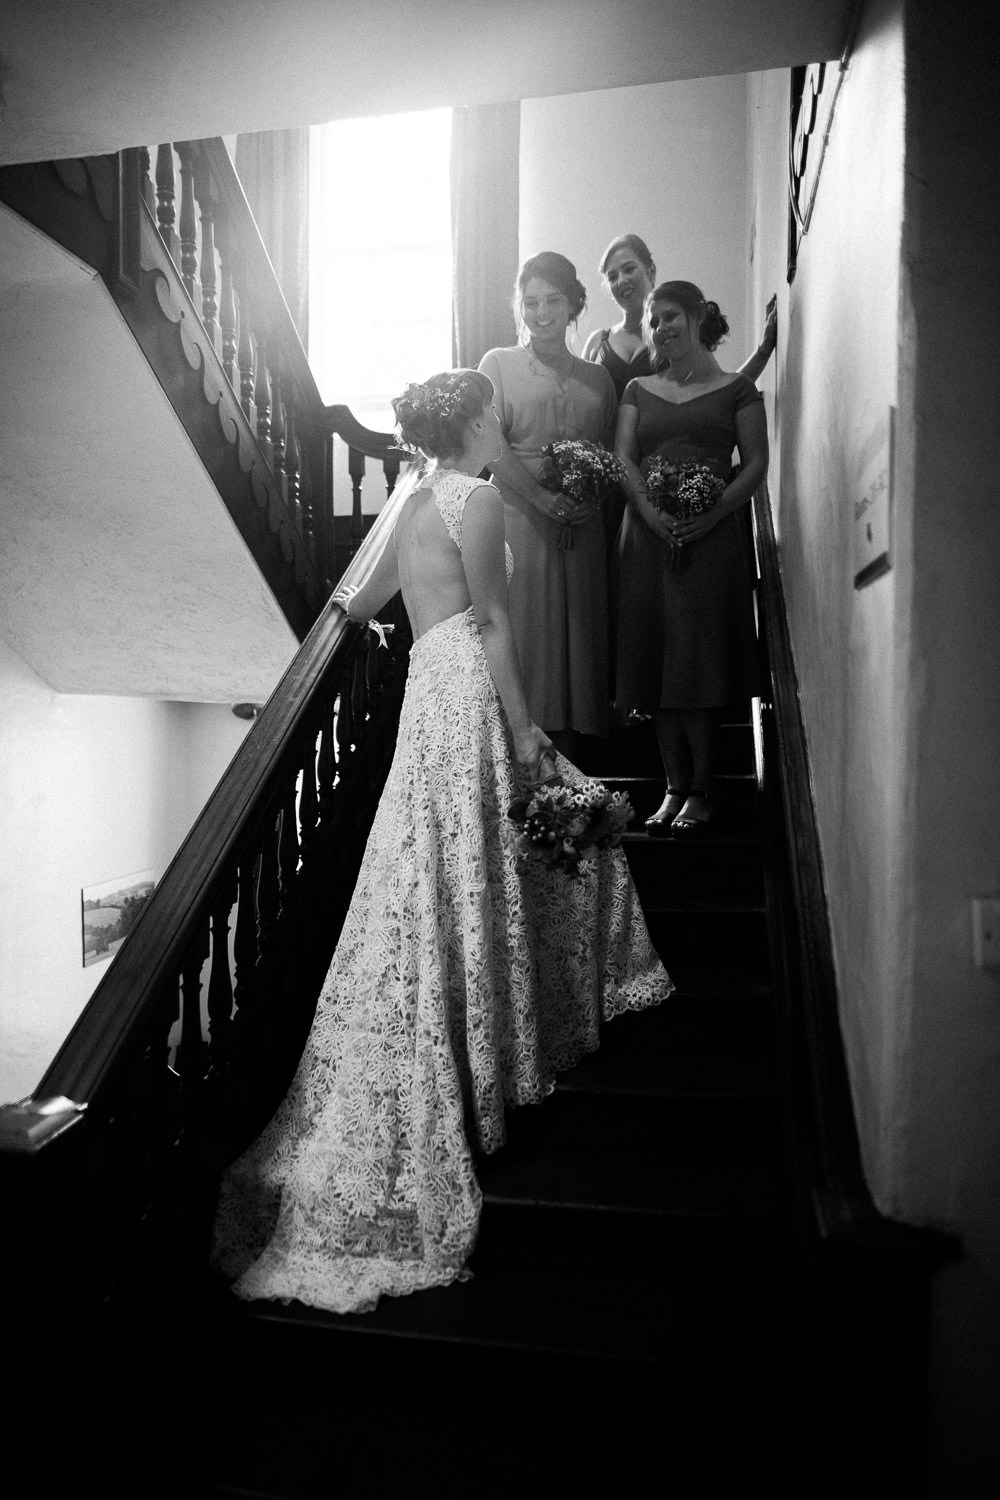 bride and bridesmaids stood on wooden stairs